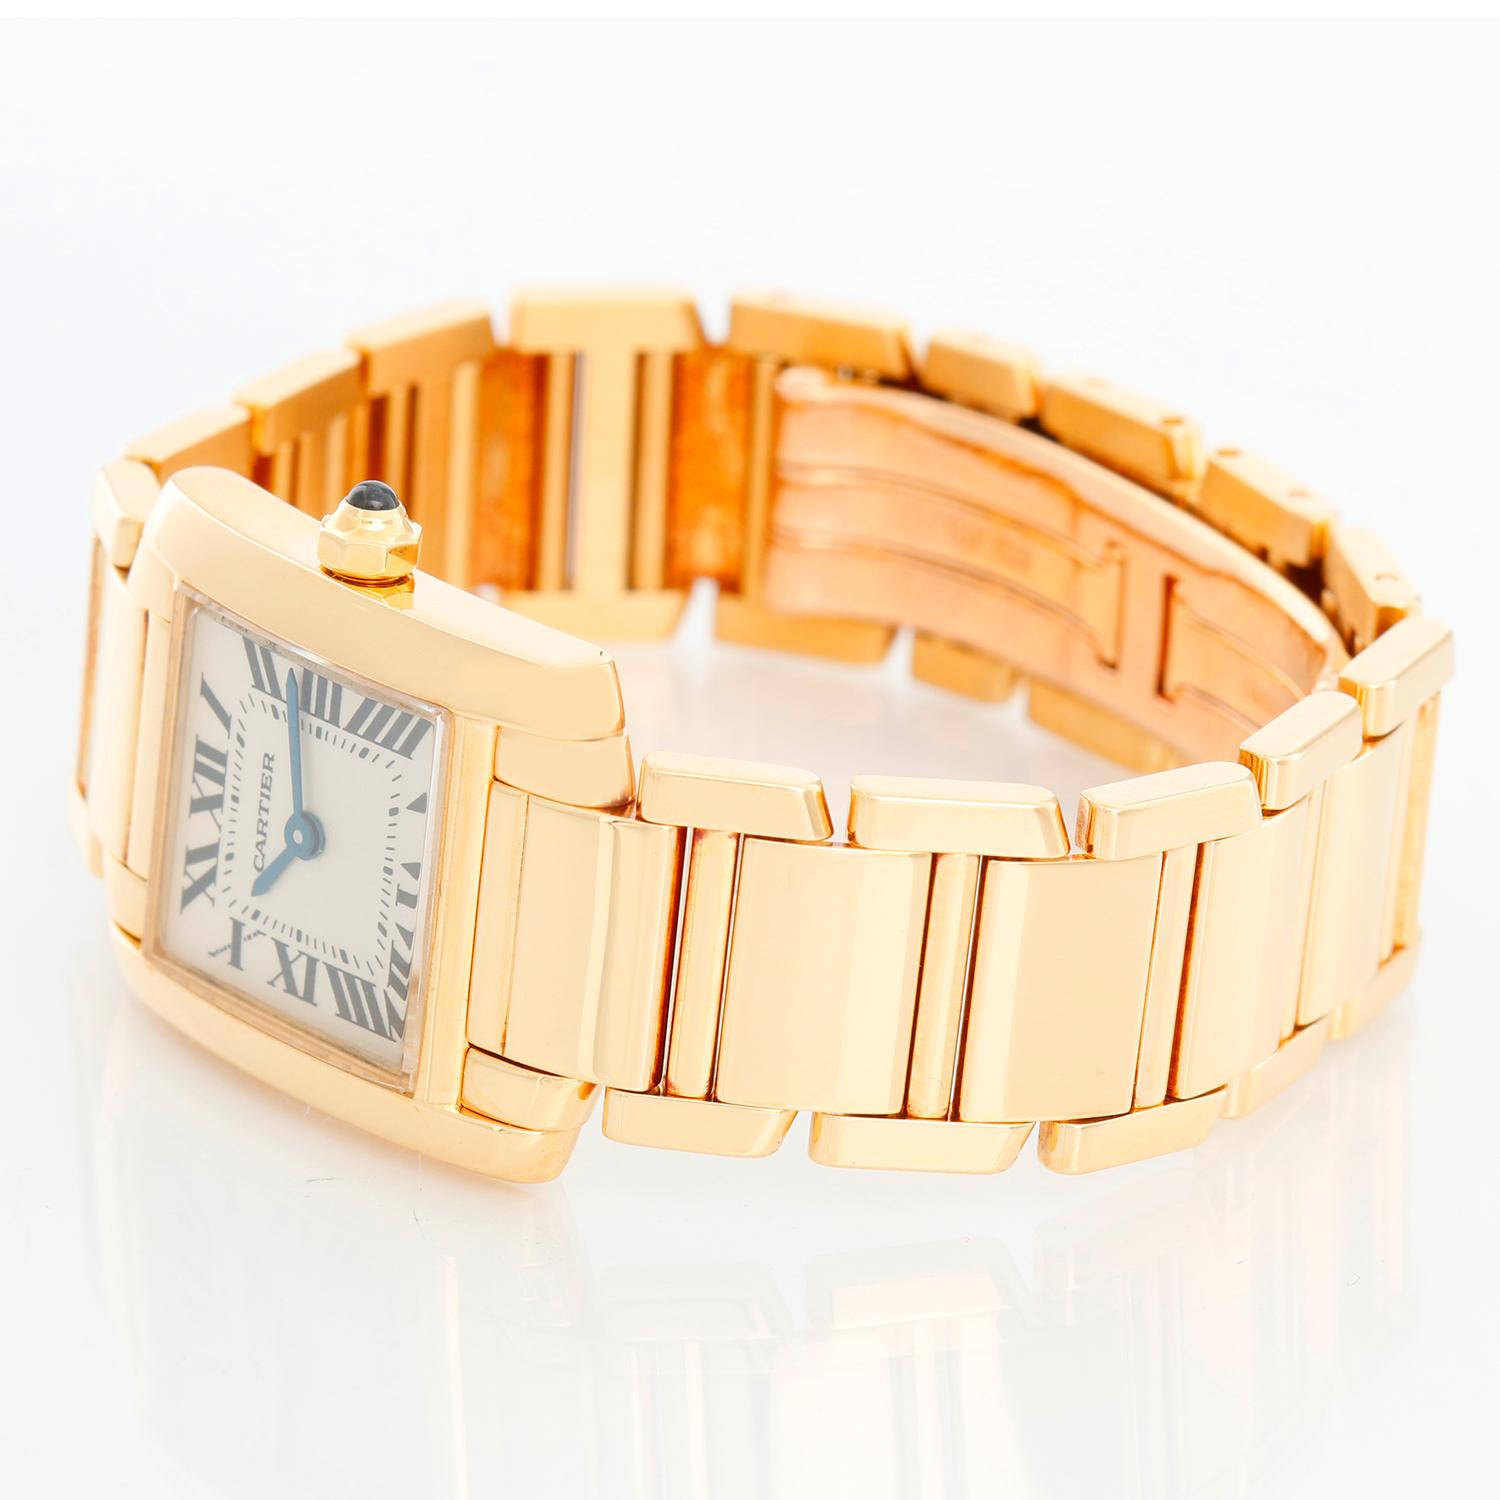 Cartier Tank Francaise 18k Yellow Gold Ladies Watch 1820 - Quartz. 18k yellow gold  case (20mm x 25mm). Ivory colored dial with black Roman numerals. 18k yellow gold Cartier Tank Francaise bracelet. Pre-owned with custom box.

All watches measure to